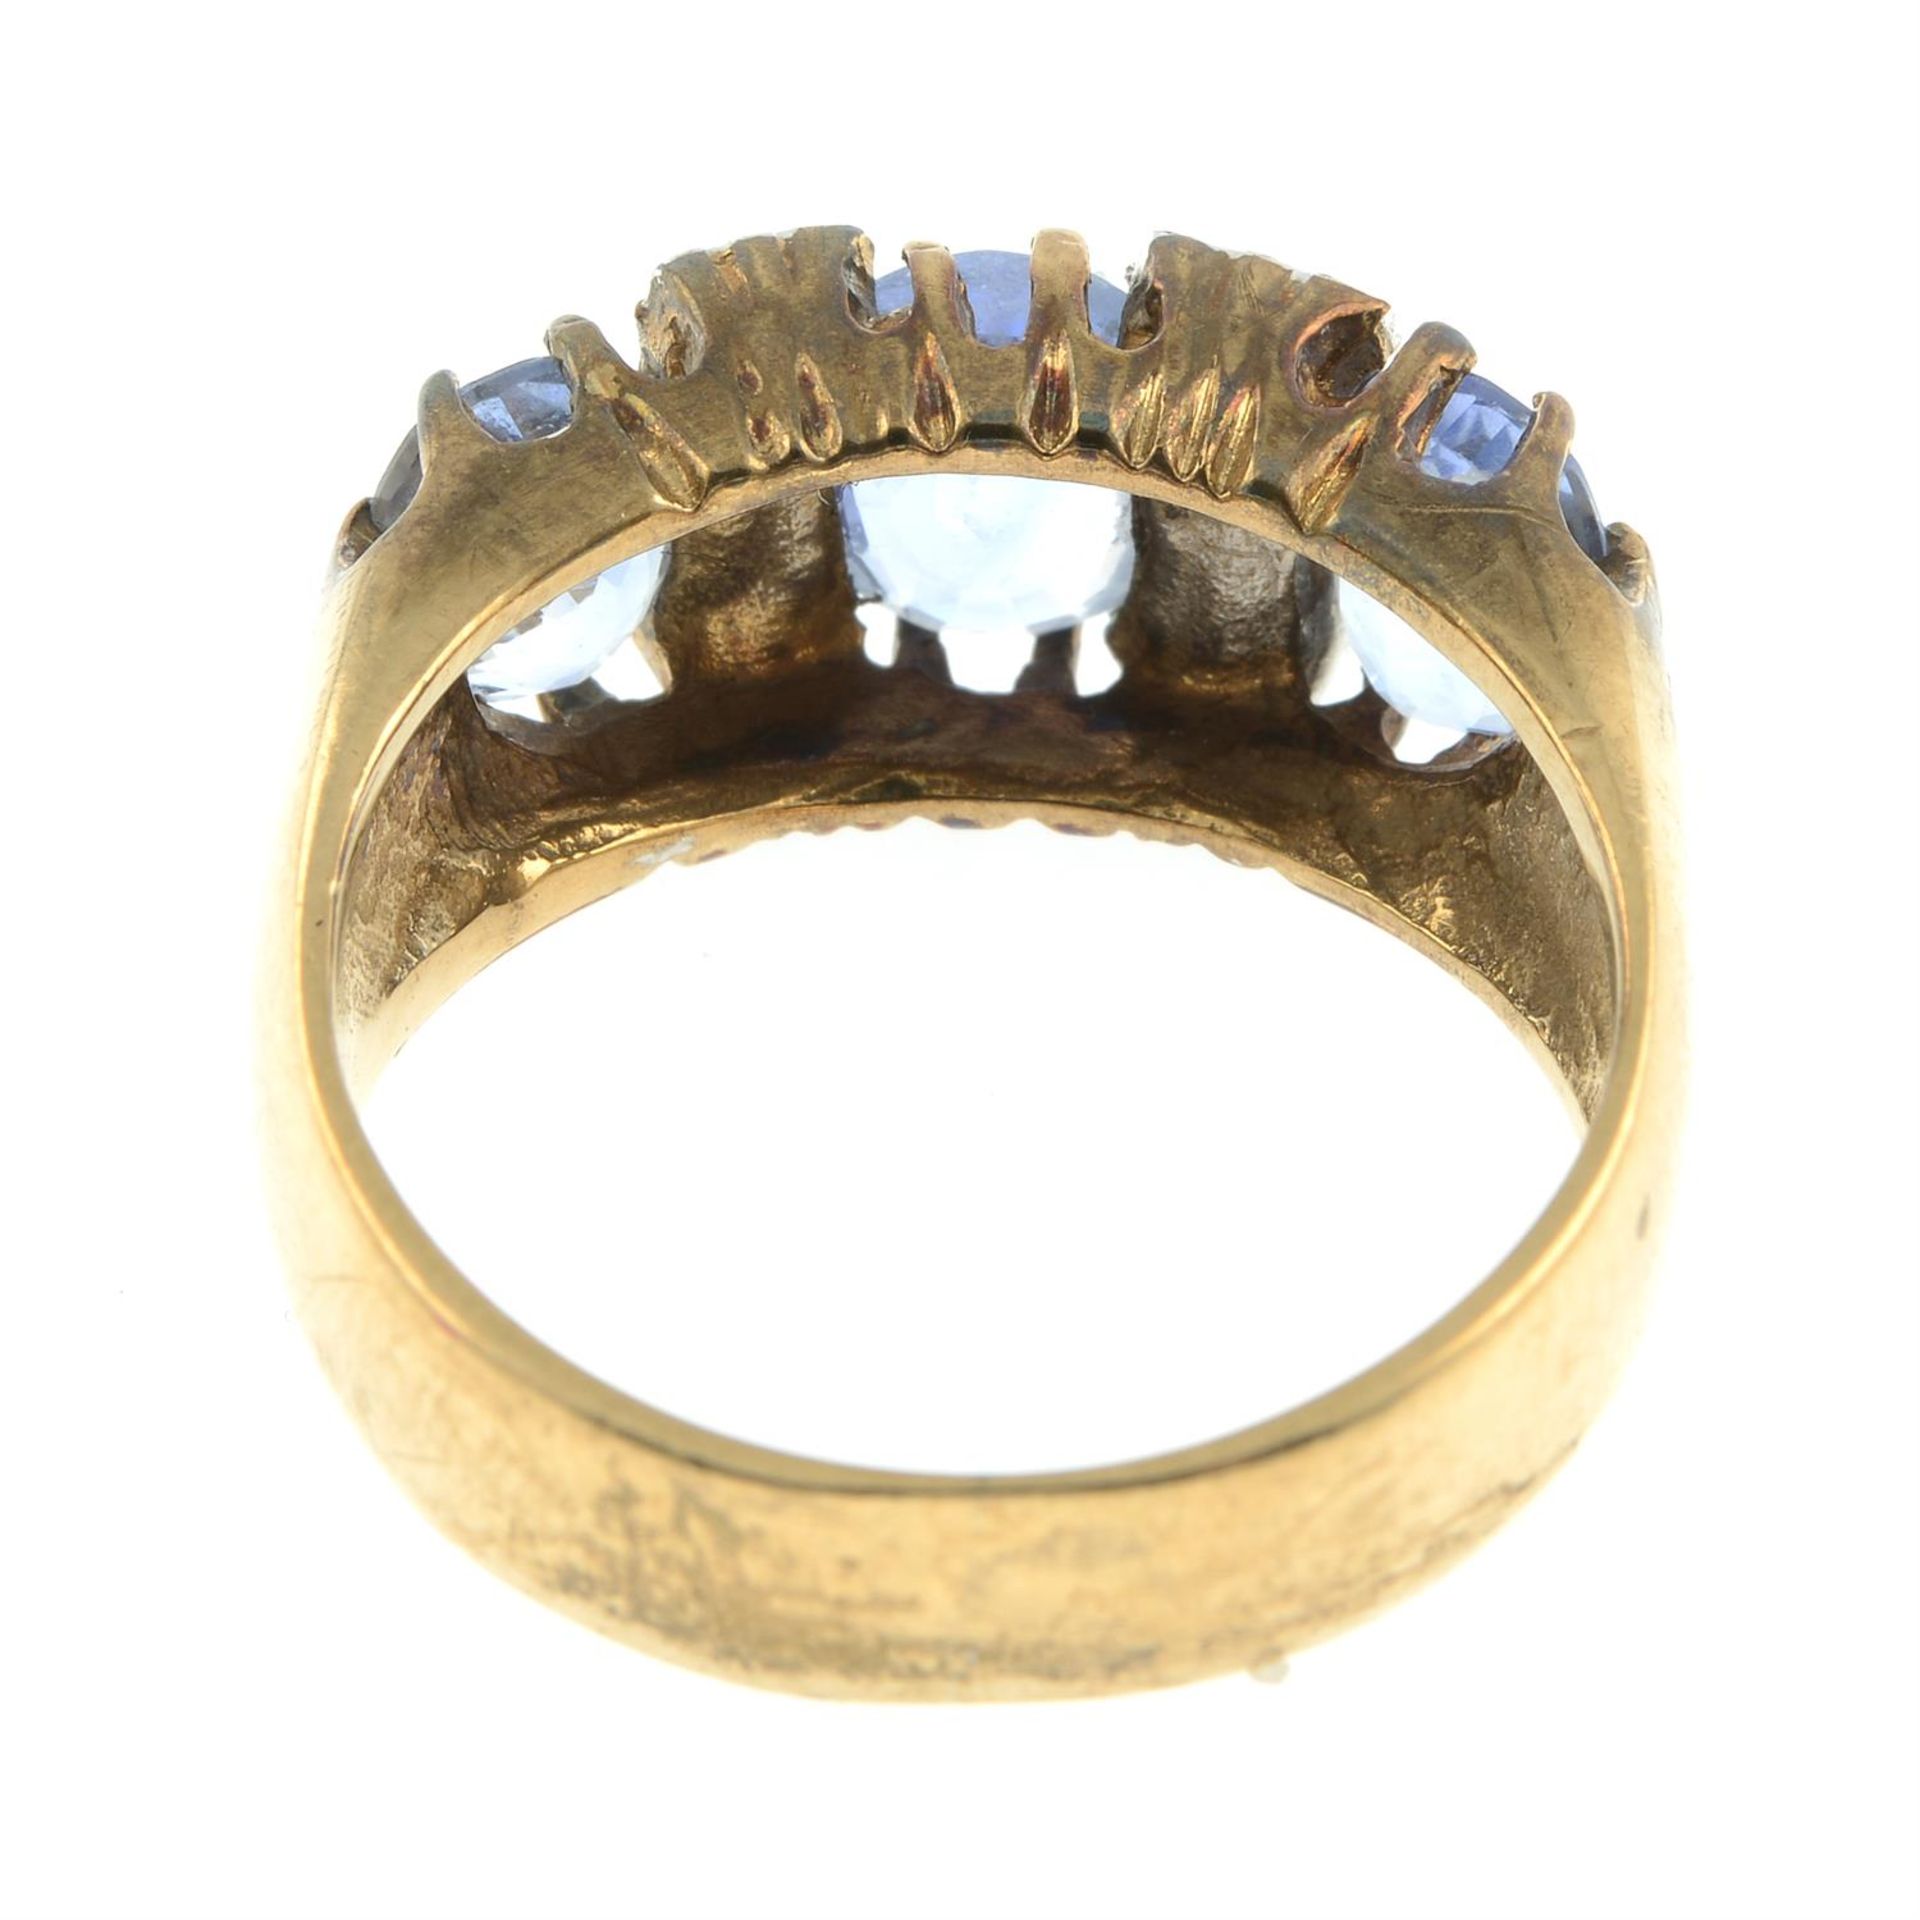 A 9ct gold sapphire three-stone ring, with brilliant-cut diamond spacers. - Image 4 of 5